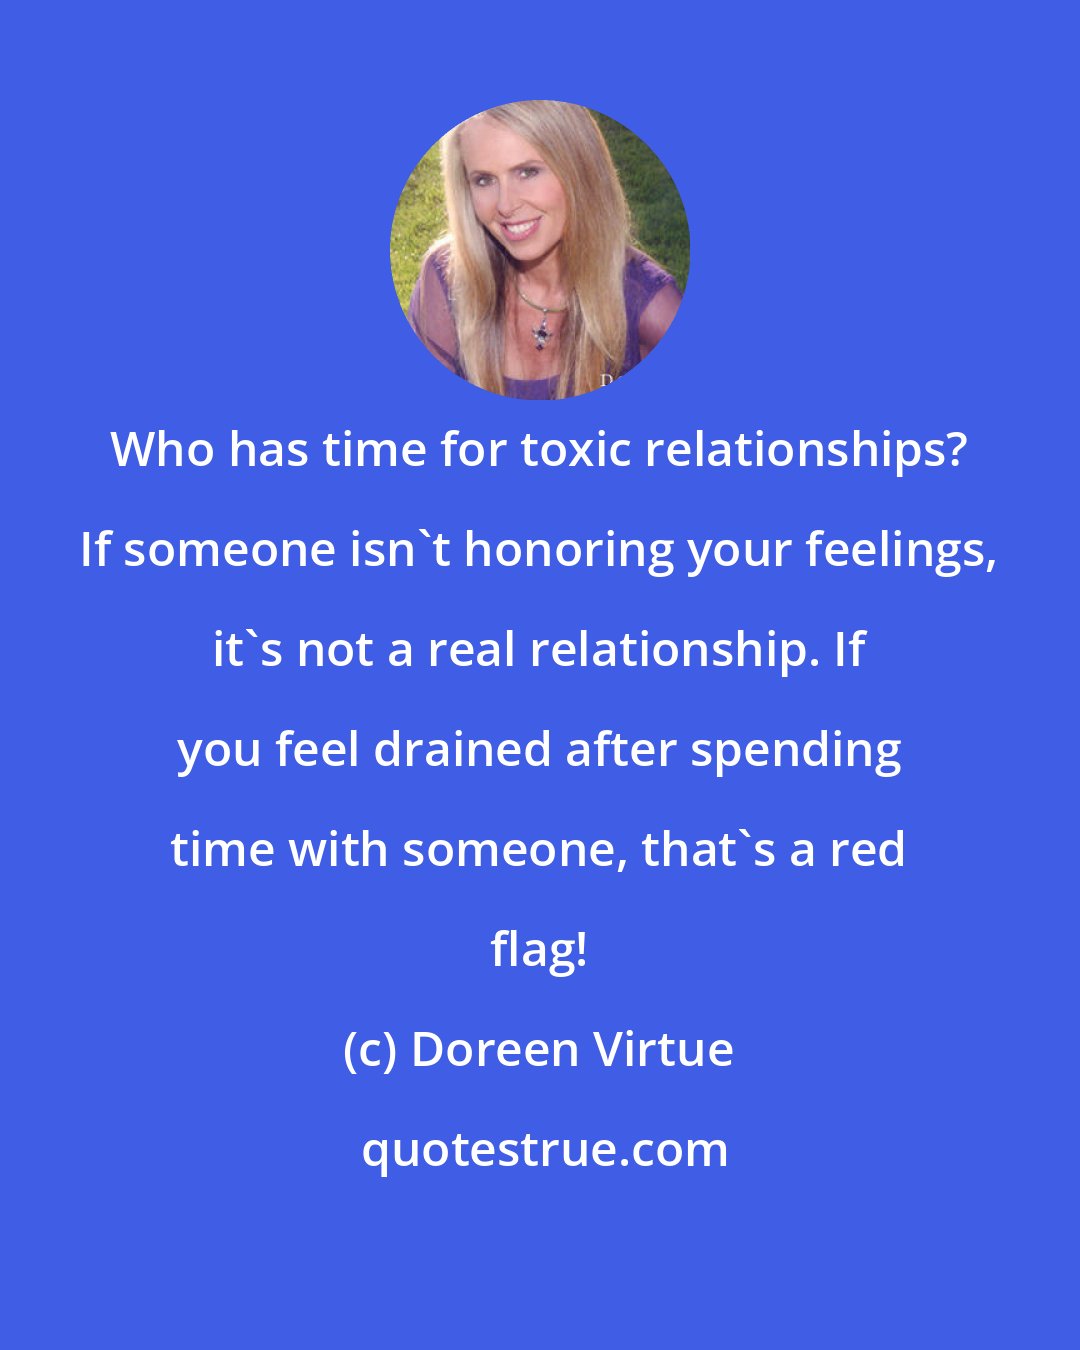 Doreen Virtue: Who has time for toxic relationships? If someone isn't honoring your feelings, it's not a real relationship. If you feel drained after spending time with someone, that's a red flag!